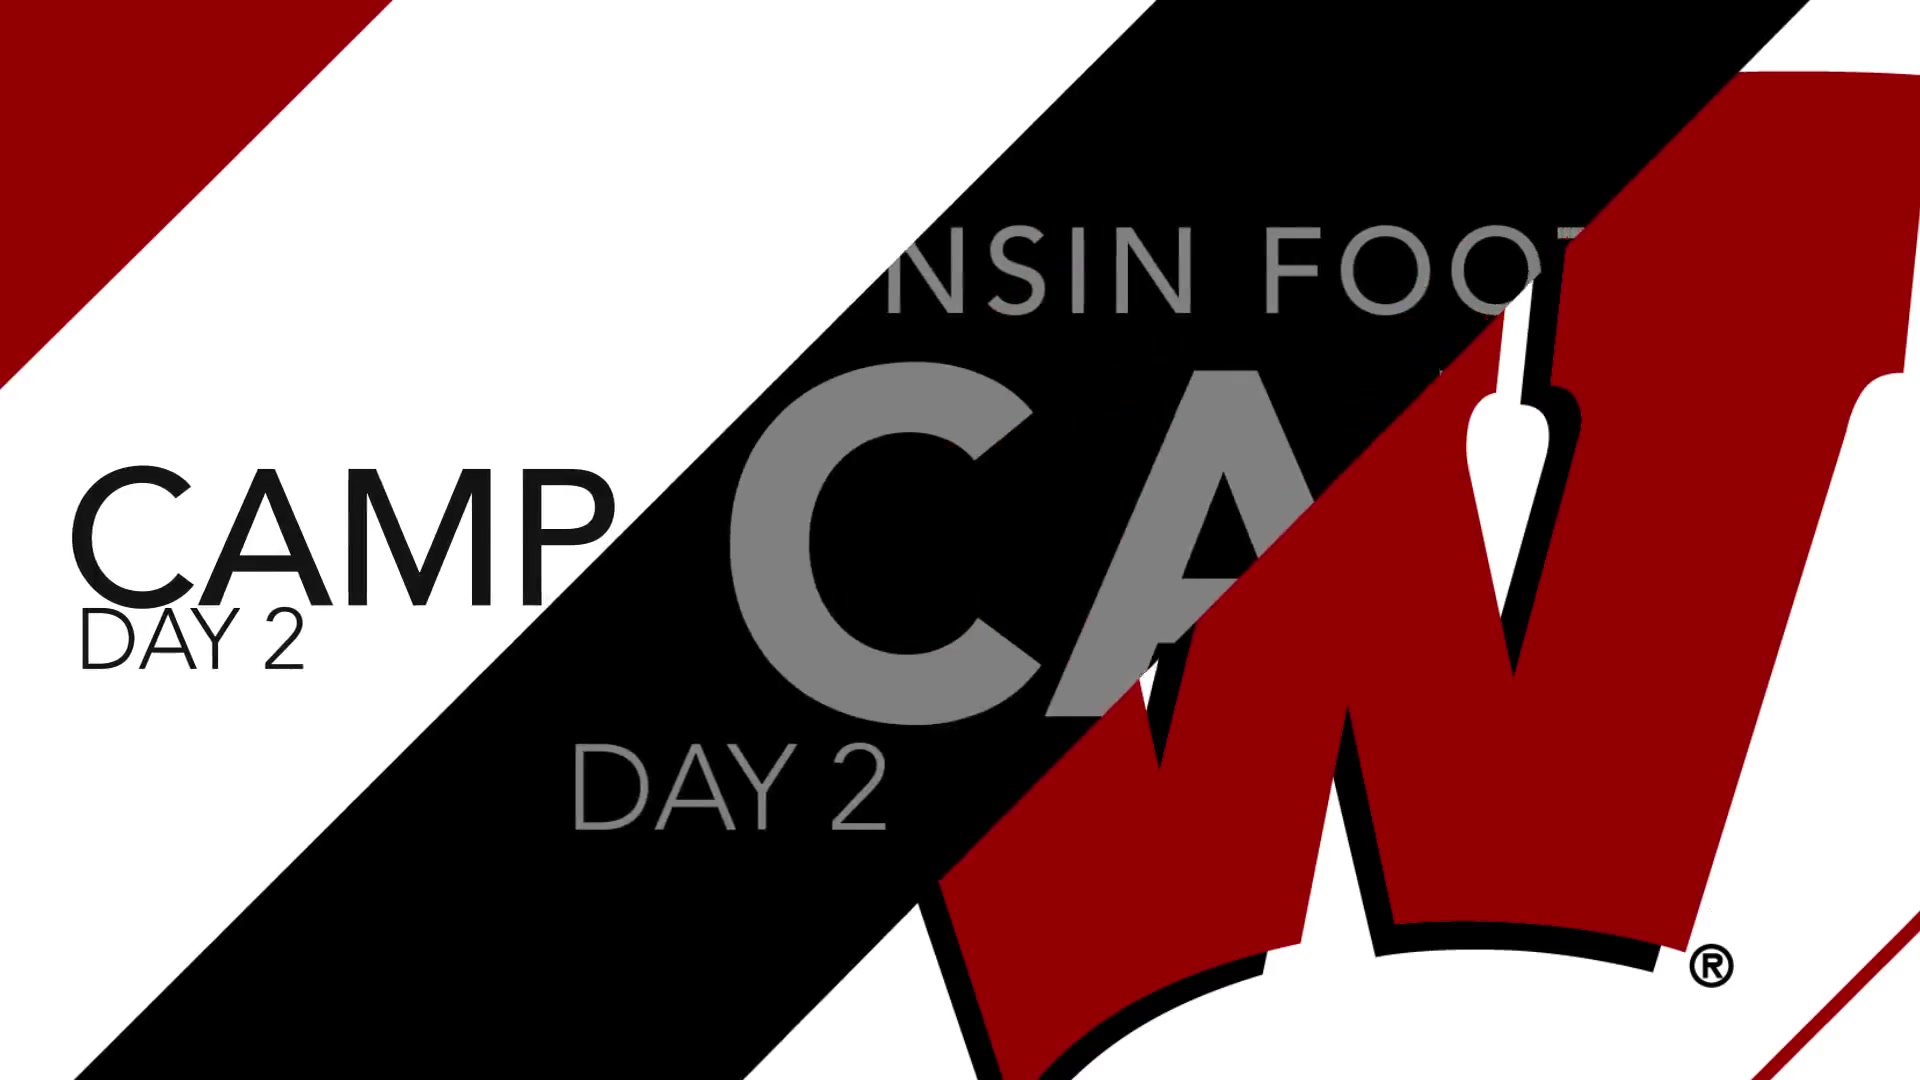 Wisconsin Football Fall Camp 2015: Day 2